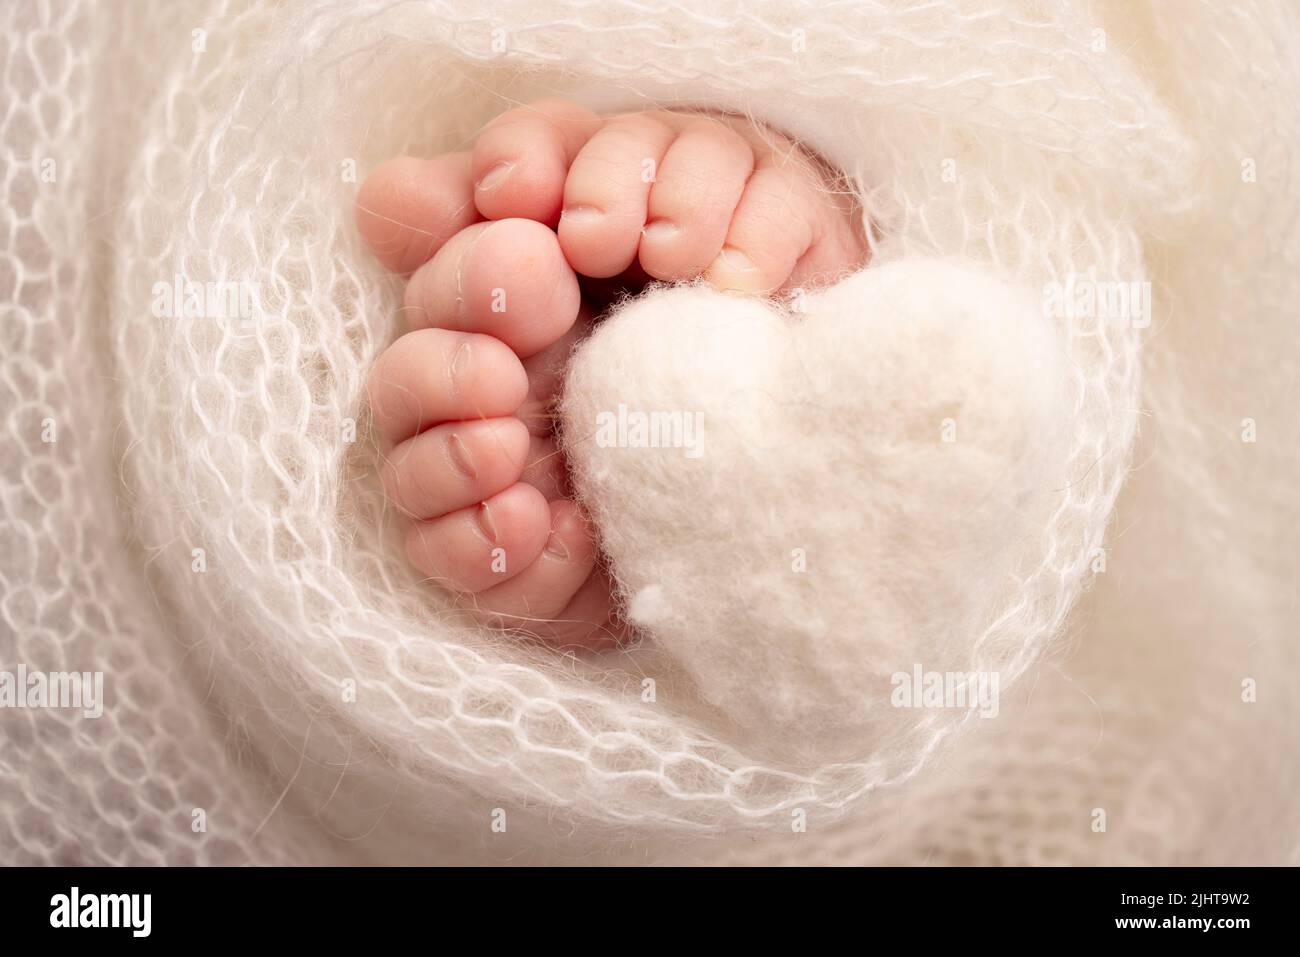 Knitted white heart in the legs of a baby. Close-up of toes, heels and feet of a newborn.  Stock Photo